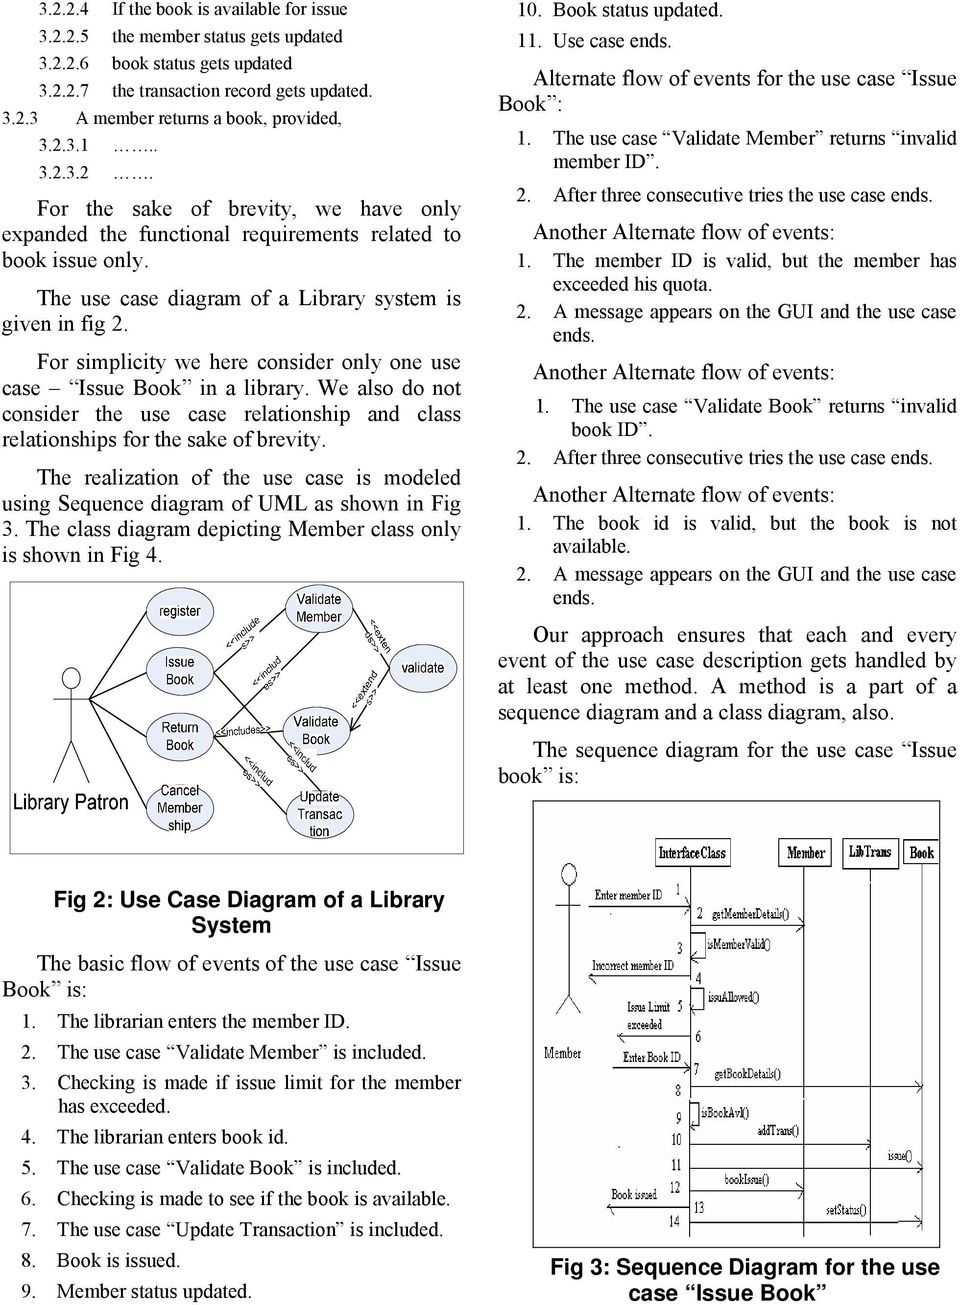 For simplicity we here consider only one use case Issue Book in a library. We also do not consider the use case relationship and class relationships for the sake of brevity.